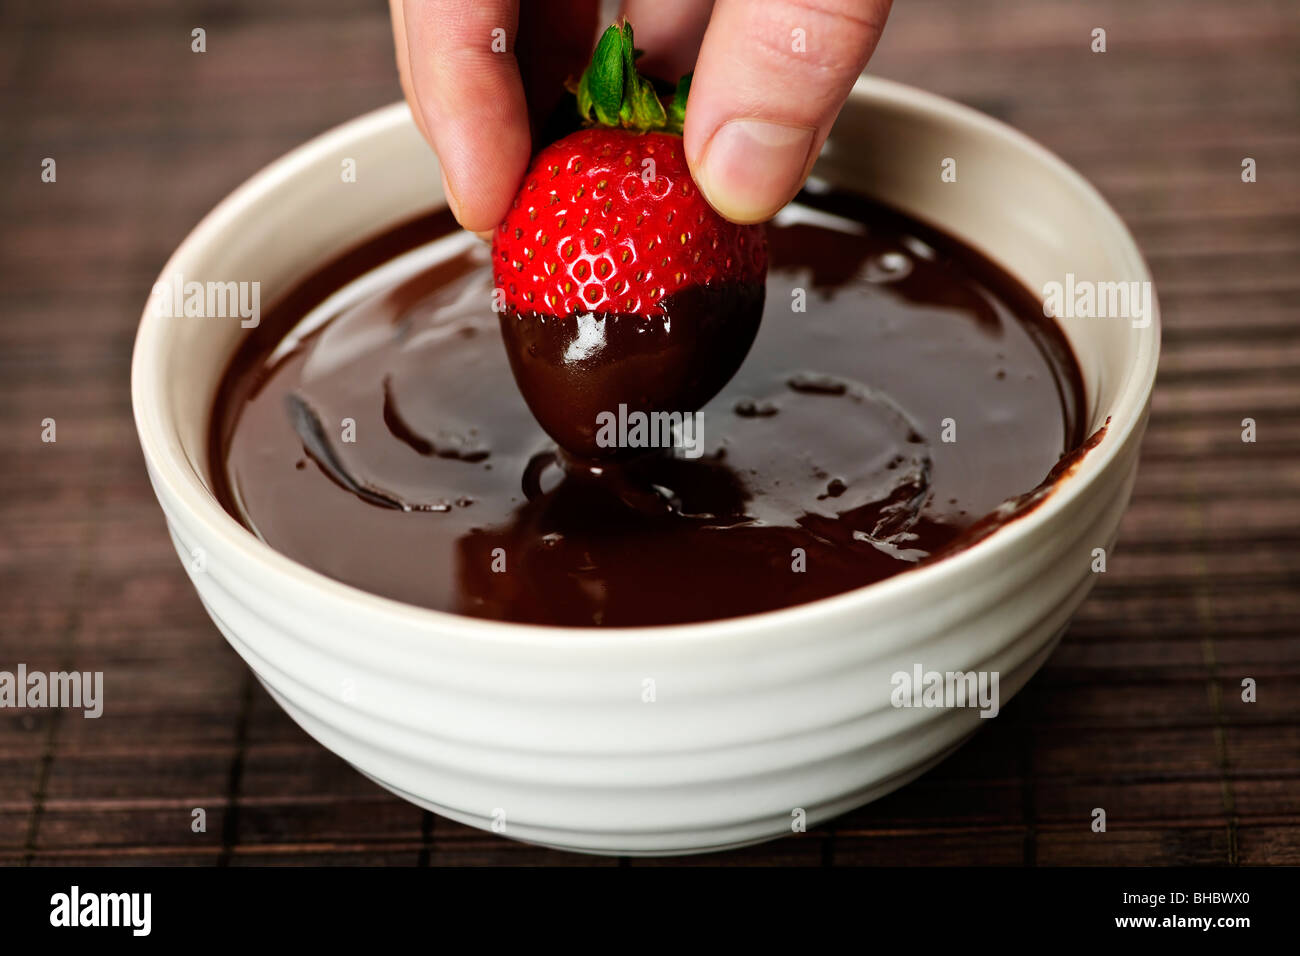 Hand dipping fresh strawberry in melted chocolate Stock Photo